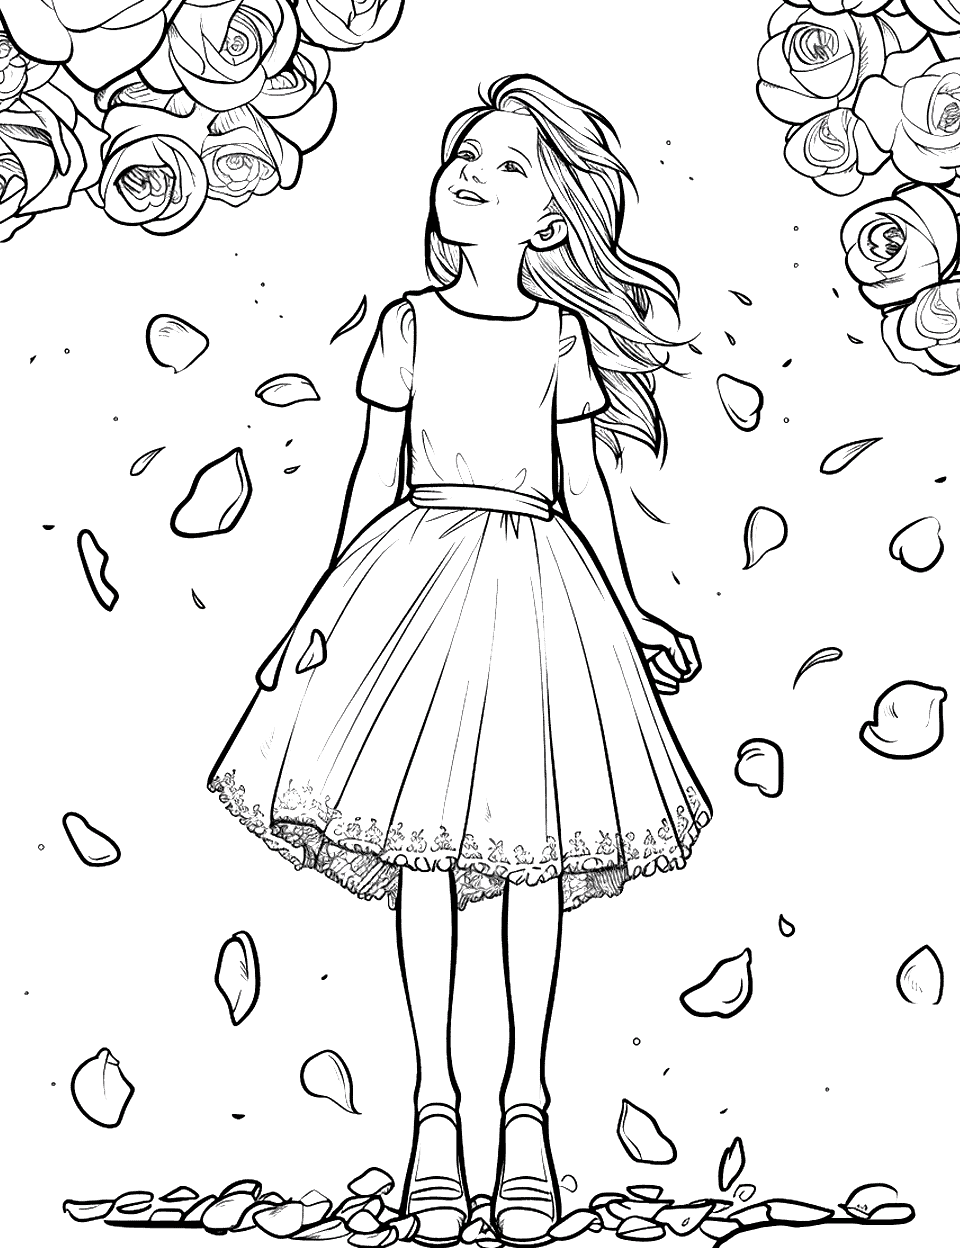 Flower Girl in Action Wedding Coloring Page - A young flower girl in a cute dress, scattering petals down the aisle.